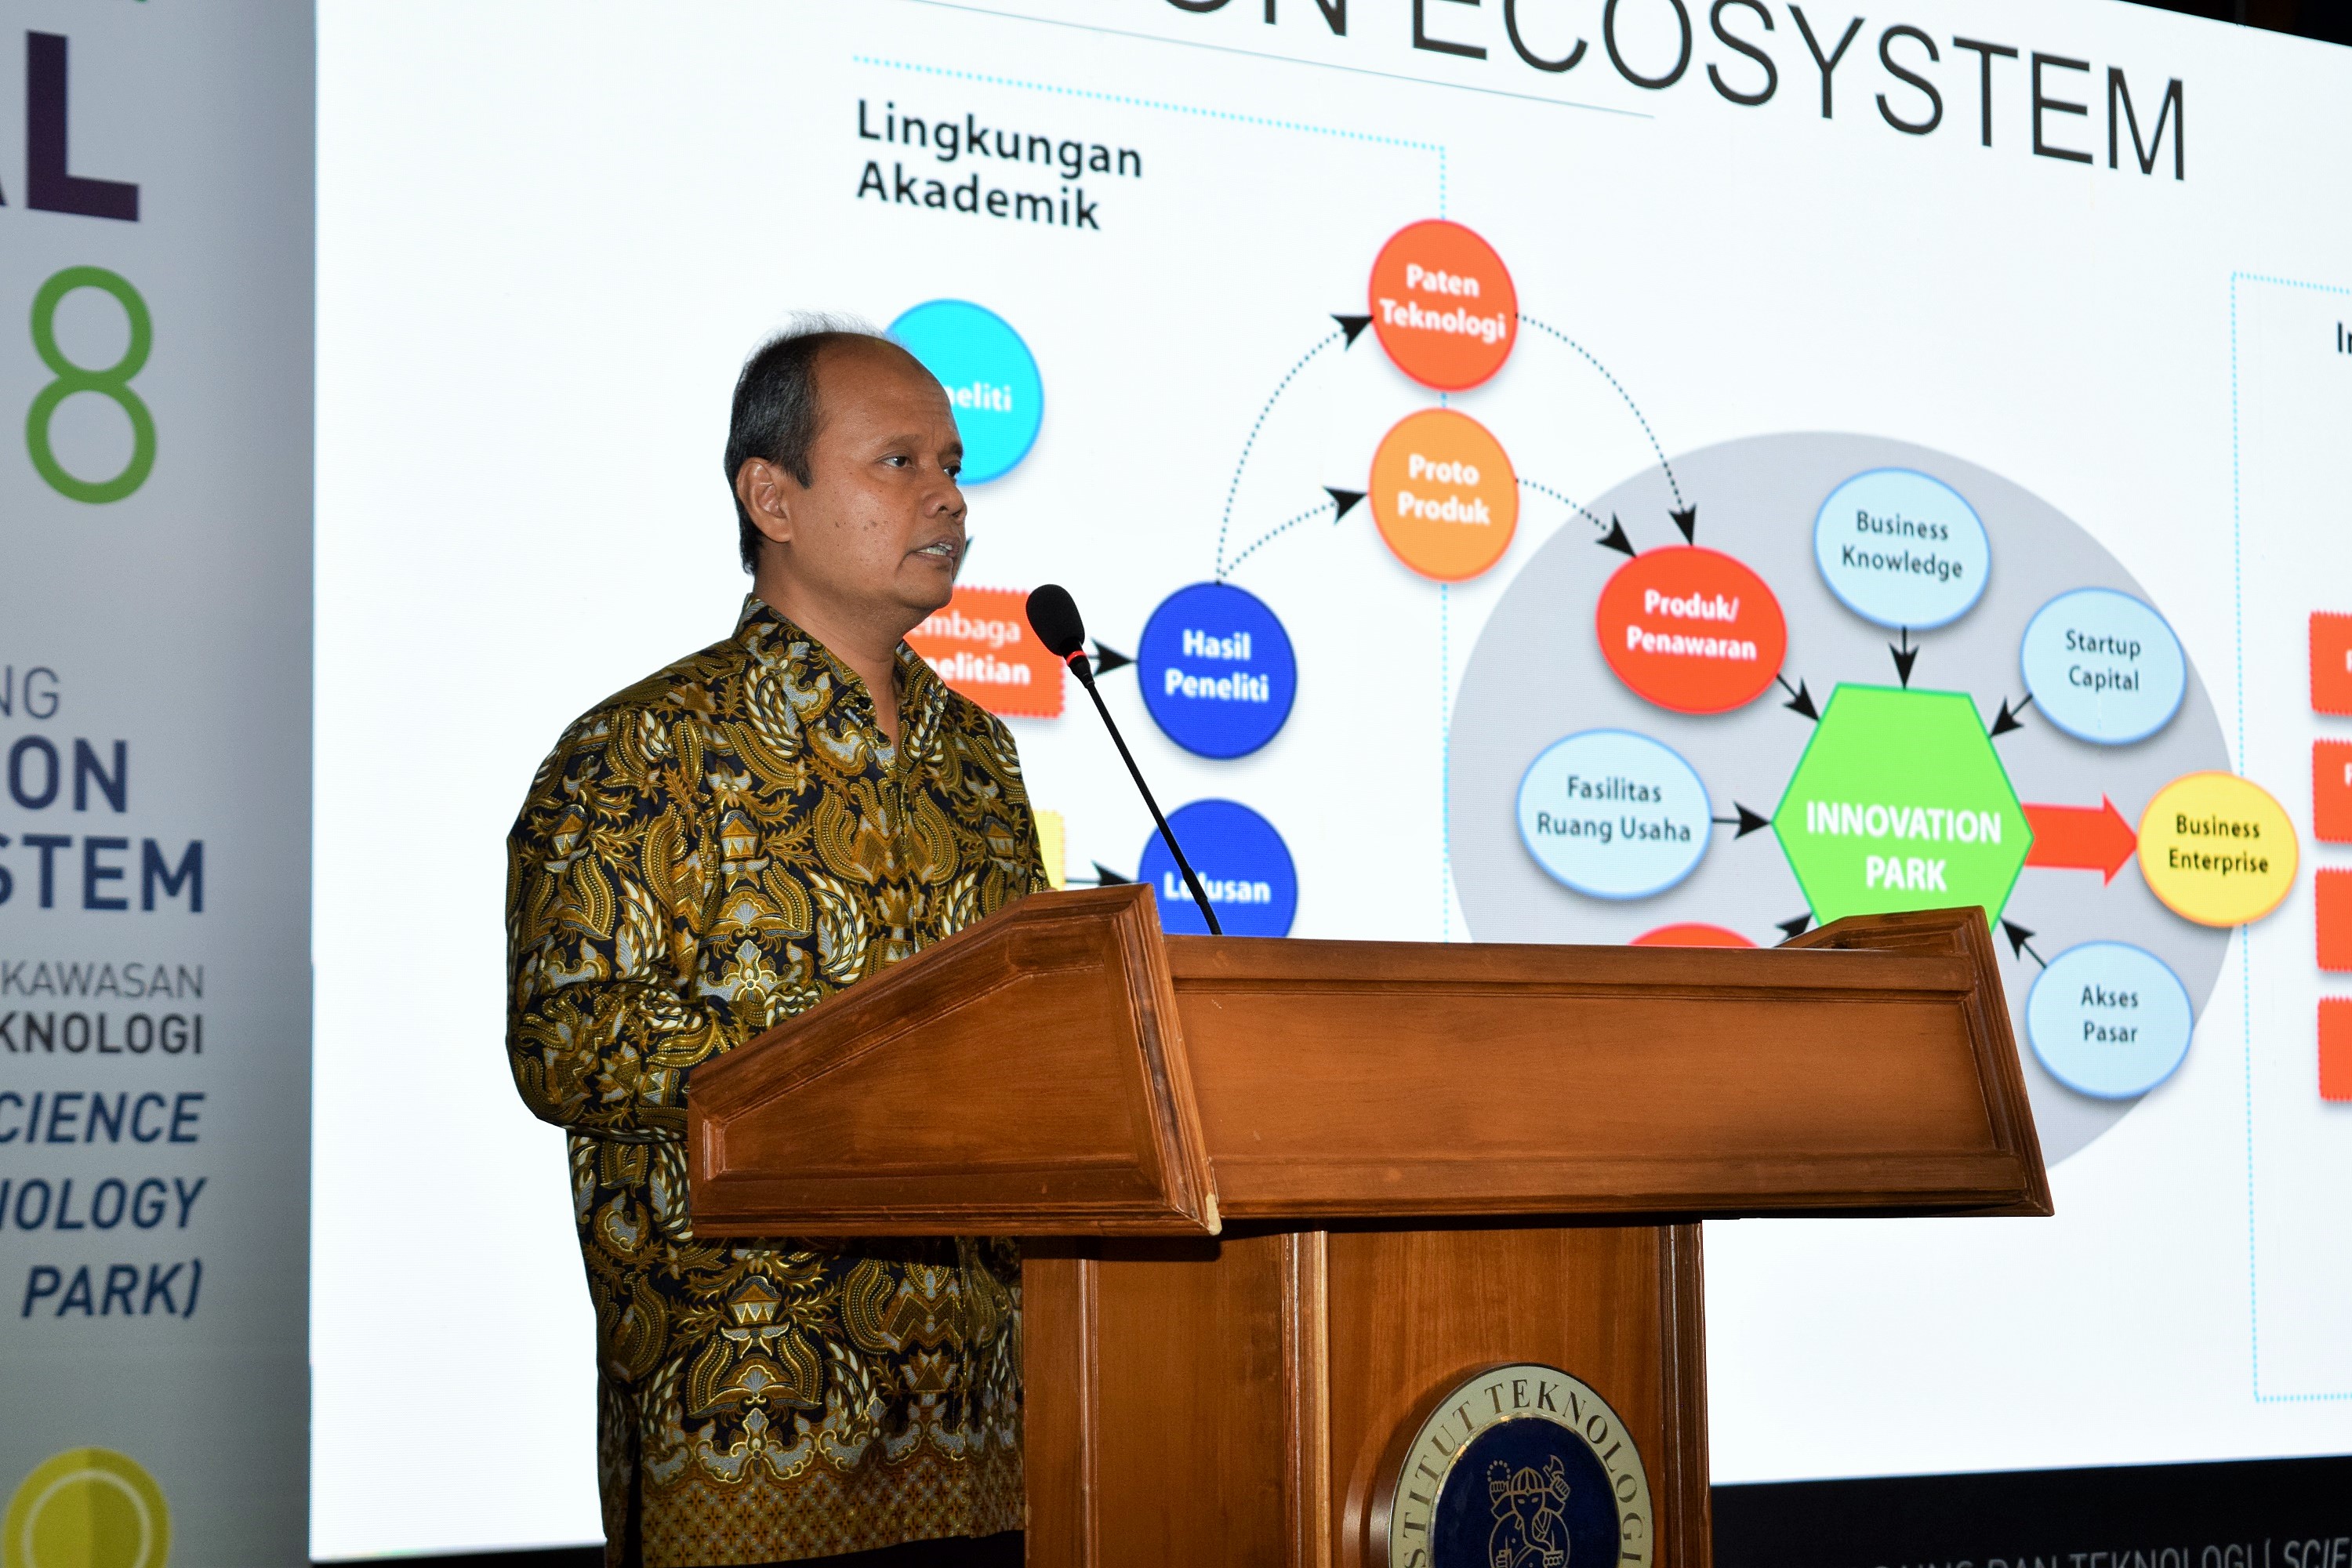 itb-encourages-the-building-of-collaborative-innovation-ecosystem